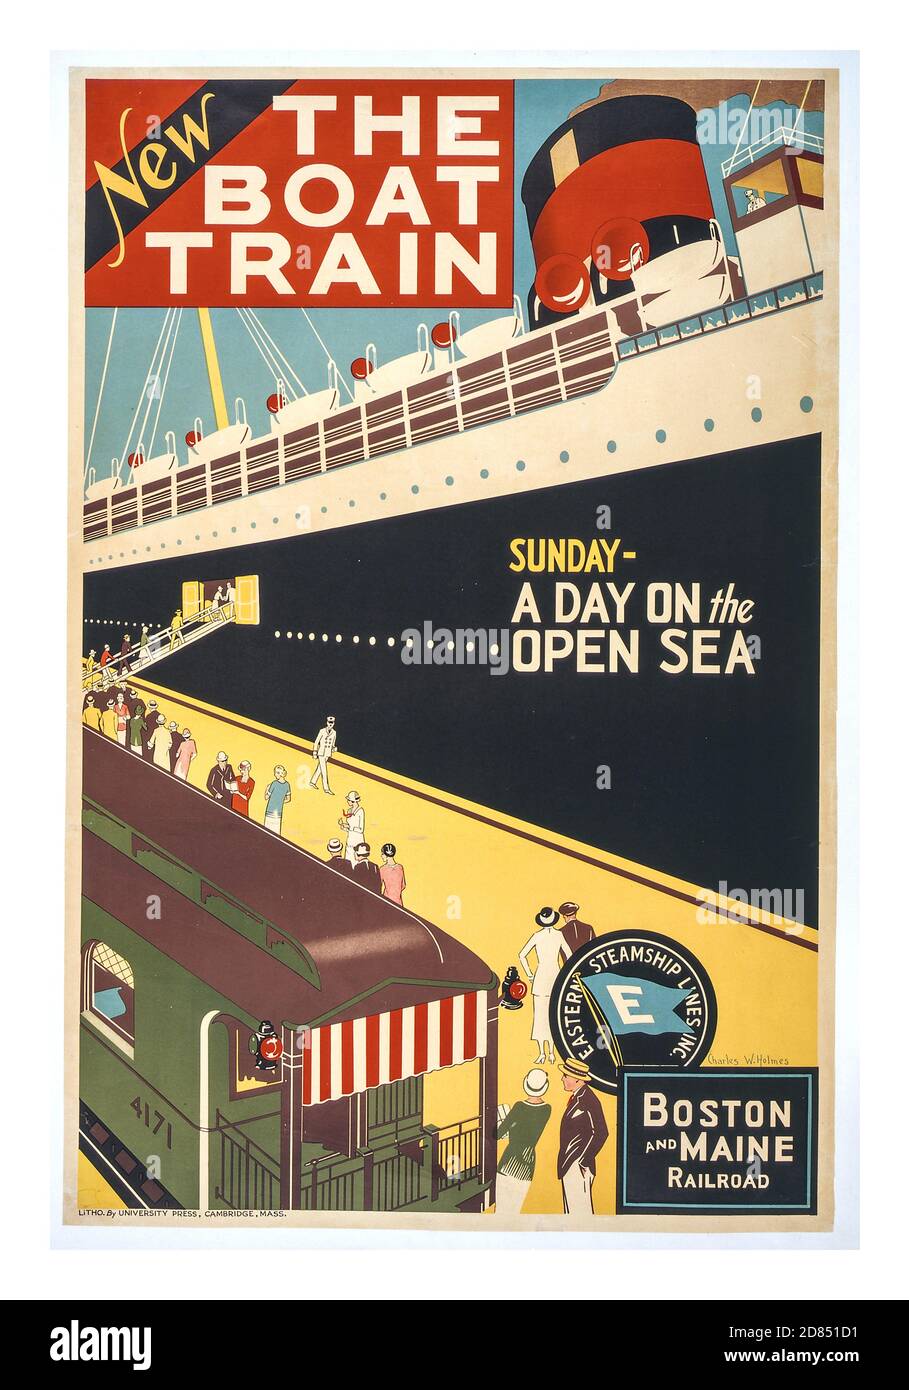 Vintage 1920's travel poster (New). The Boat Train. Sunday - a day on the open sea by artist Charles W. Holmes ; Litho. by University Press, Cambridge, Mass.Boston and Maine Railroad United States : s.n., ca. 1925] (poster) : lithograph, color  Poster showing a train alongside a cruise ship, with passengers in between boarding the cruise ship liner Stock Photo